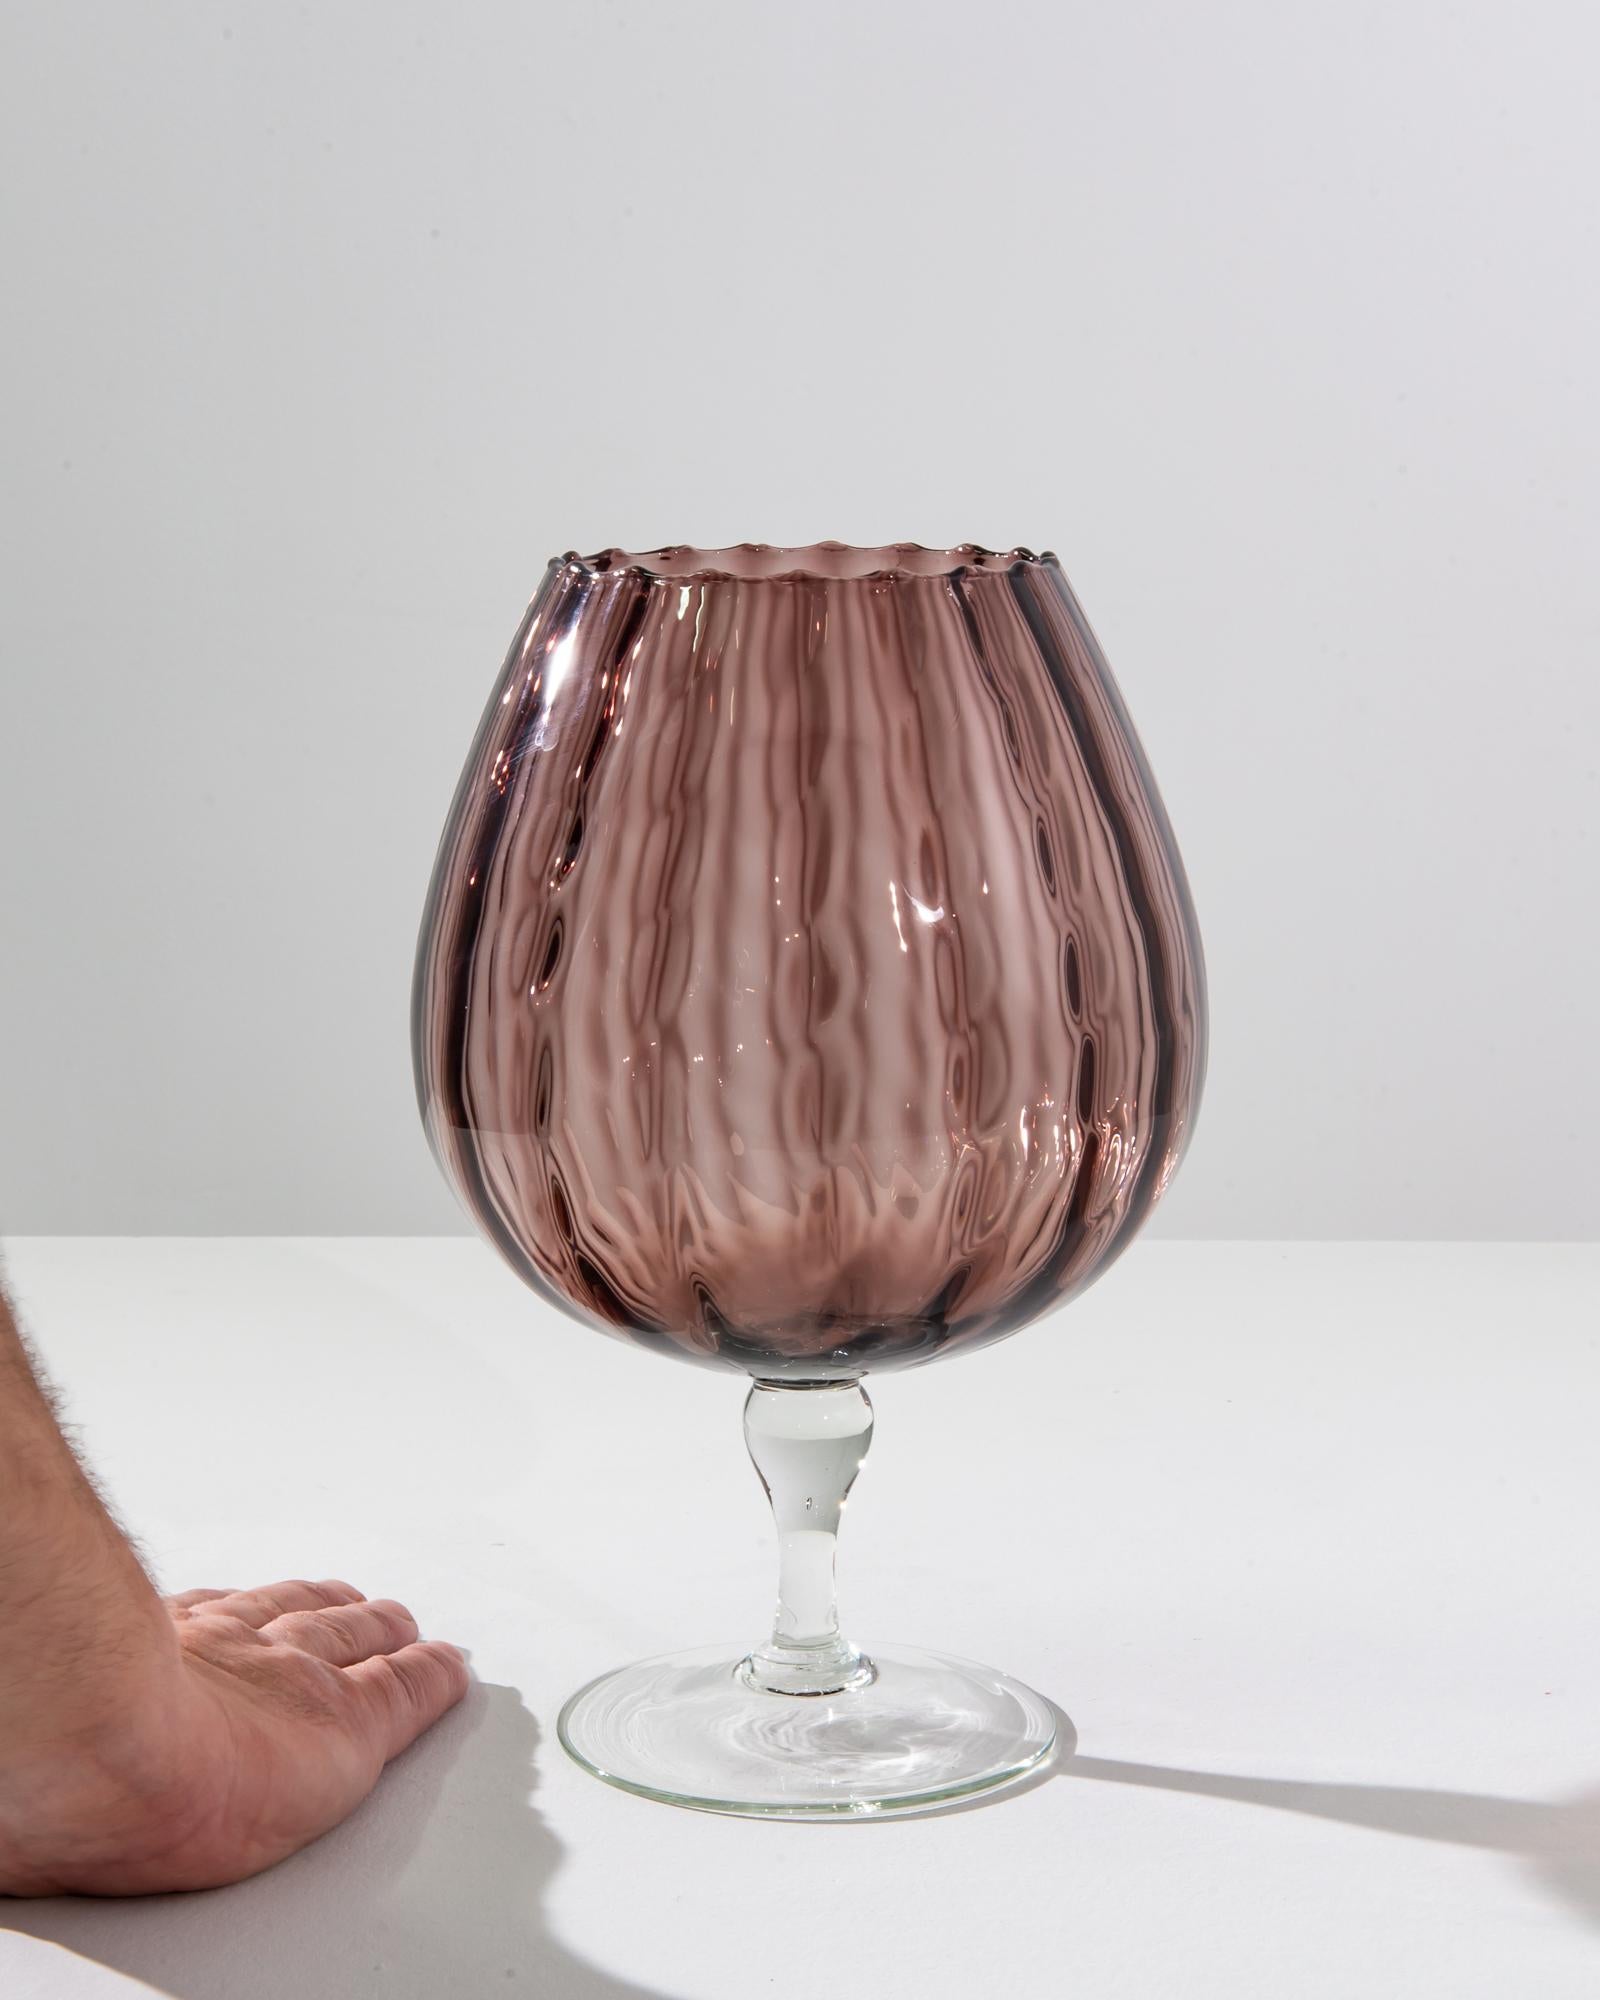 Elevate your home décor with this exquisite Italian glass goblet from the 1960s, a true testament to the artistry of the era. The goblet's striking design features a delicate, fluted body with a unique pleated texture, creating a play of light and